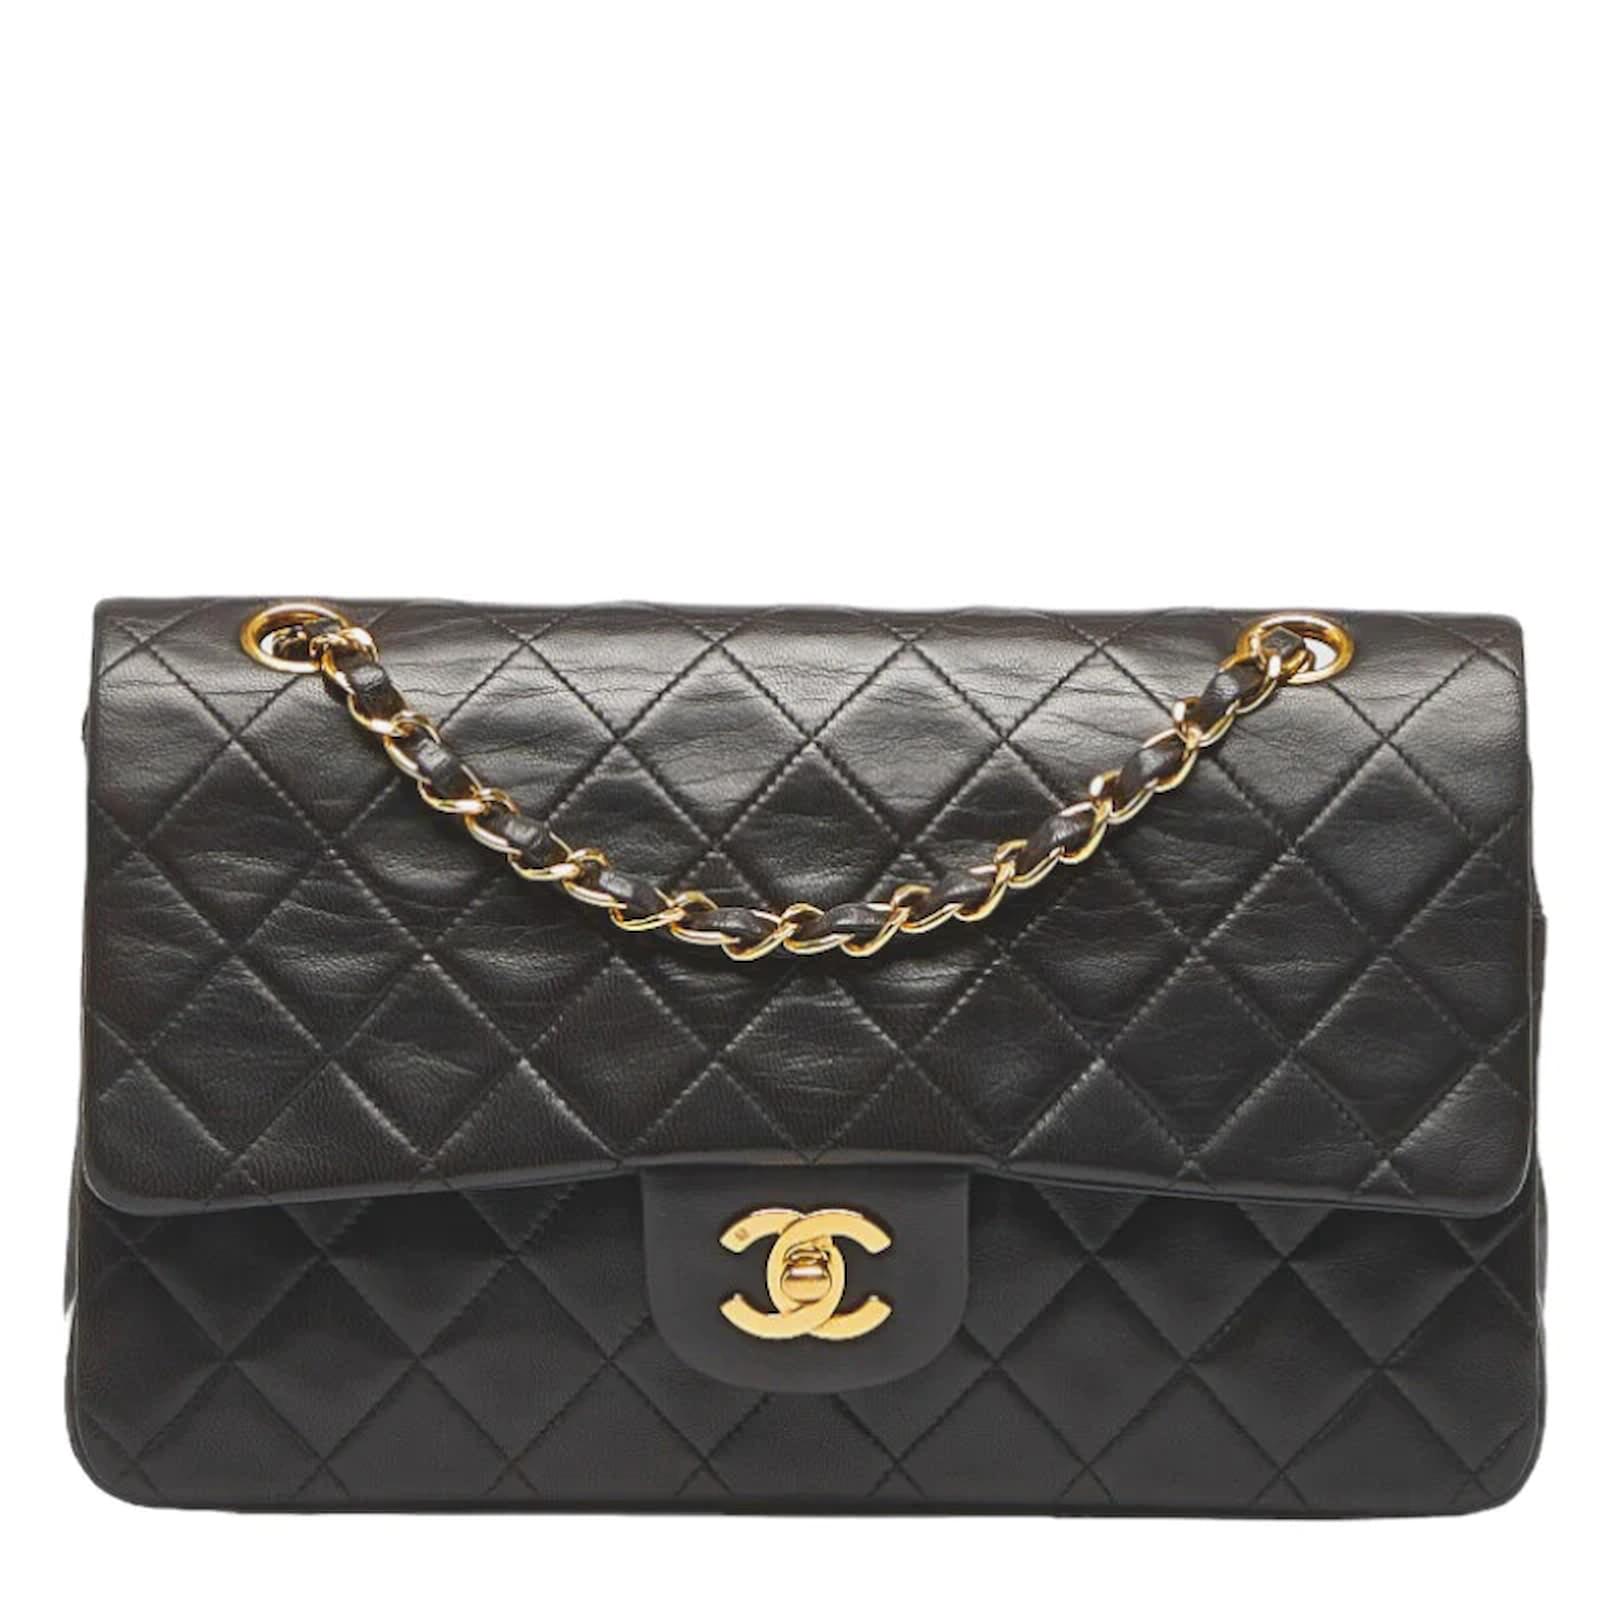 Chanel Medium Classic lined Flap Bag Black Leather Pony-style